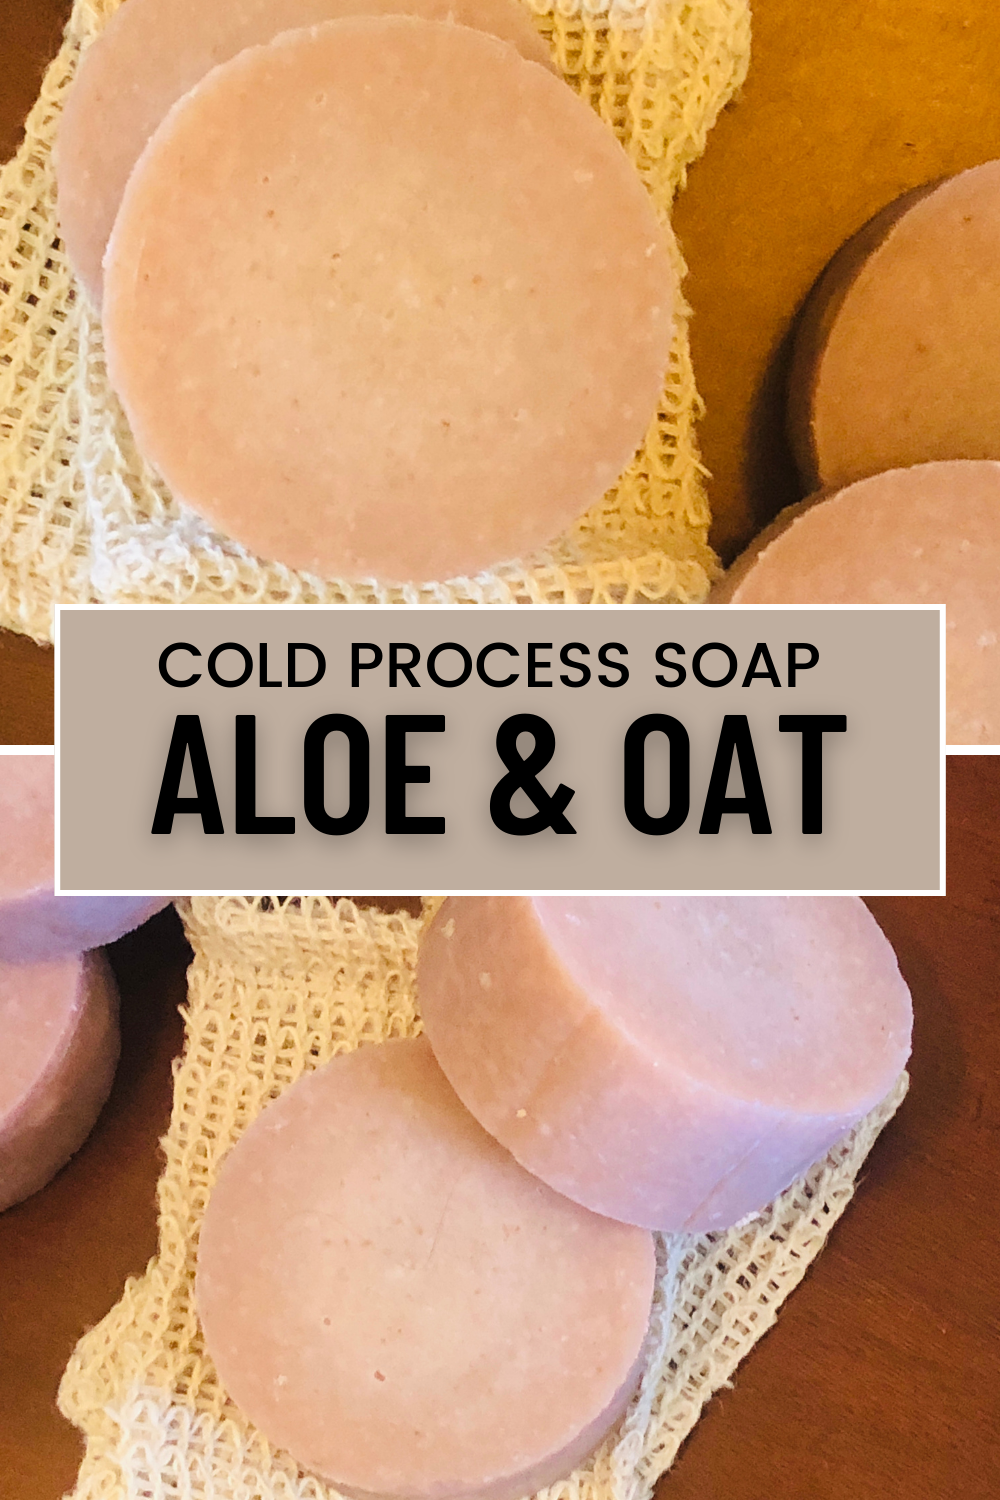 Creamy Aloe and Oat Soap – an unscented aloe vera cold processed soap that’s simple to make! A creamy and yet gentle soap for sensitive skin!